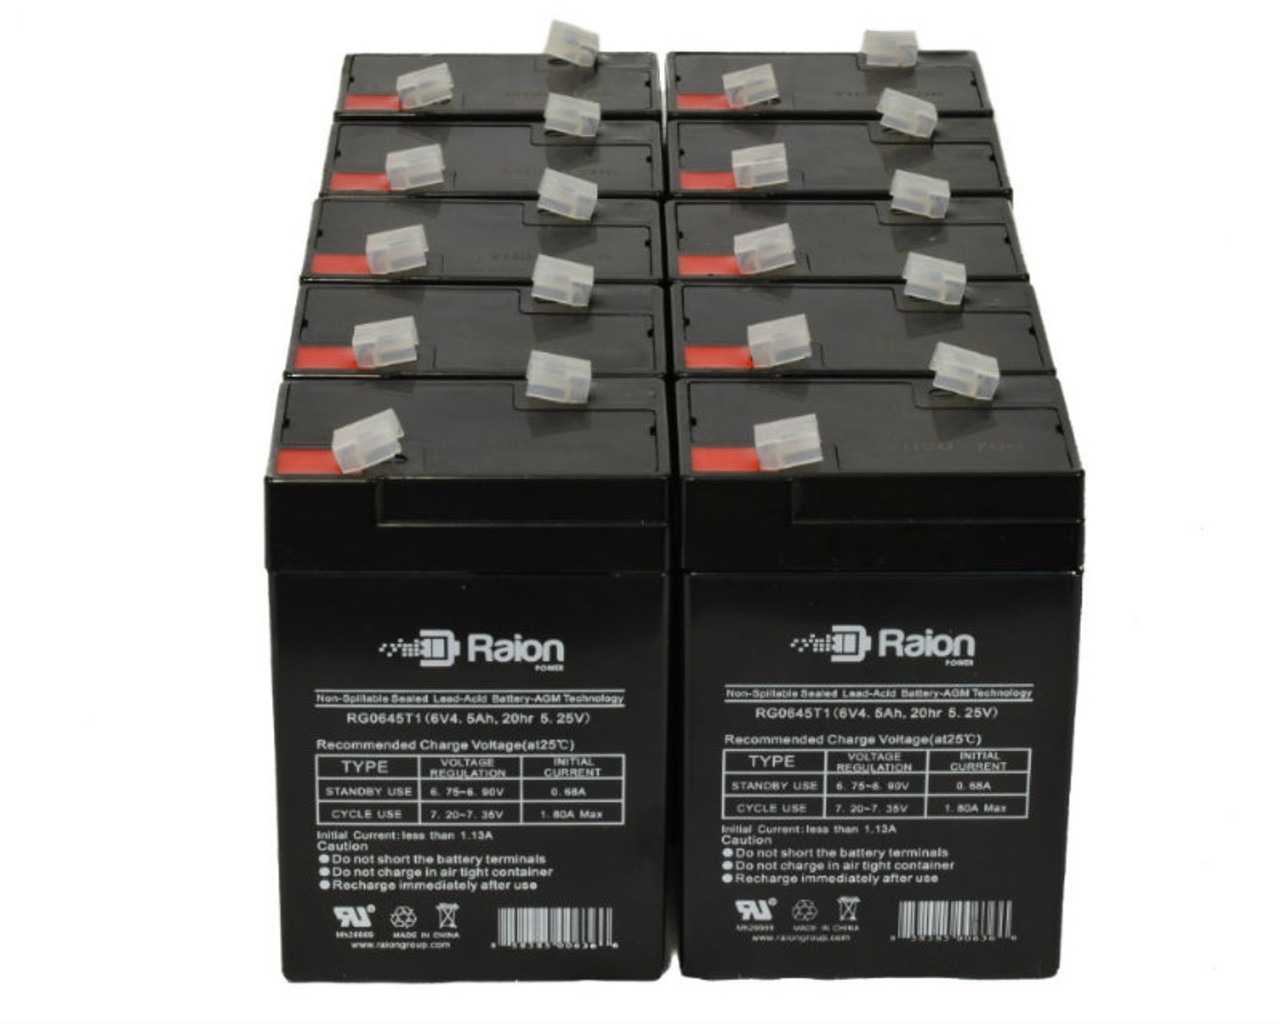 Raion Power 6V 4.5Ah Replacement Emergency Light Battery for Siltron SN640 - 10 Pack